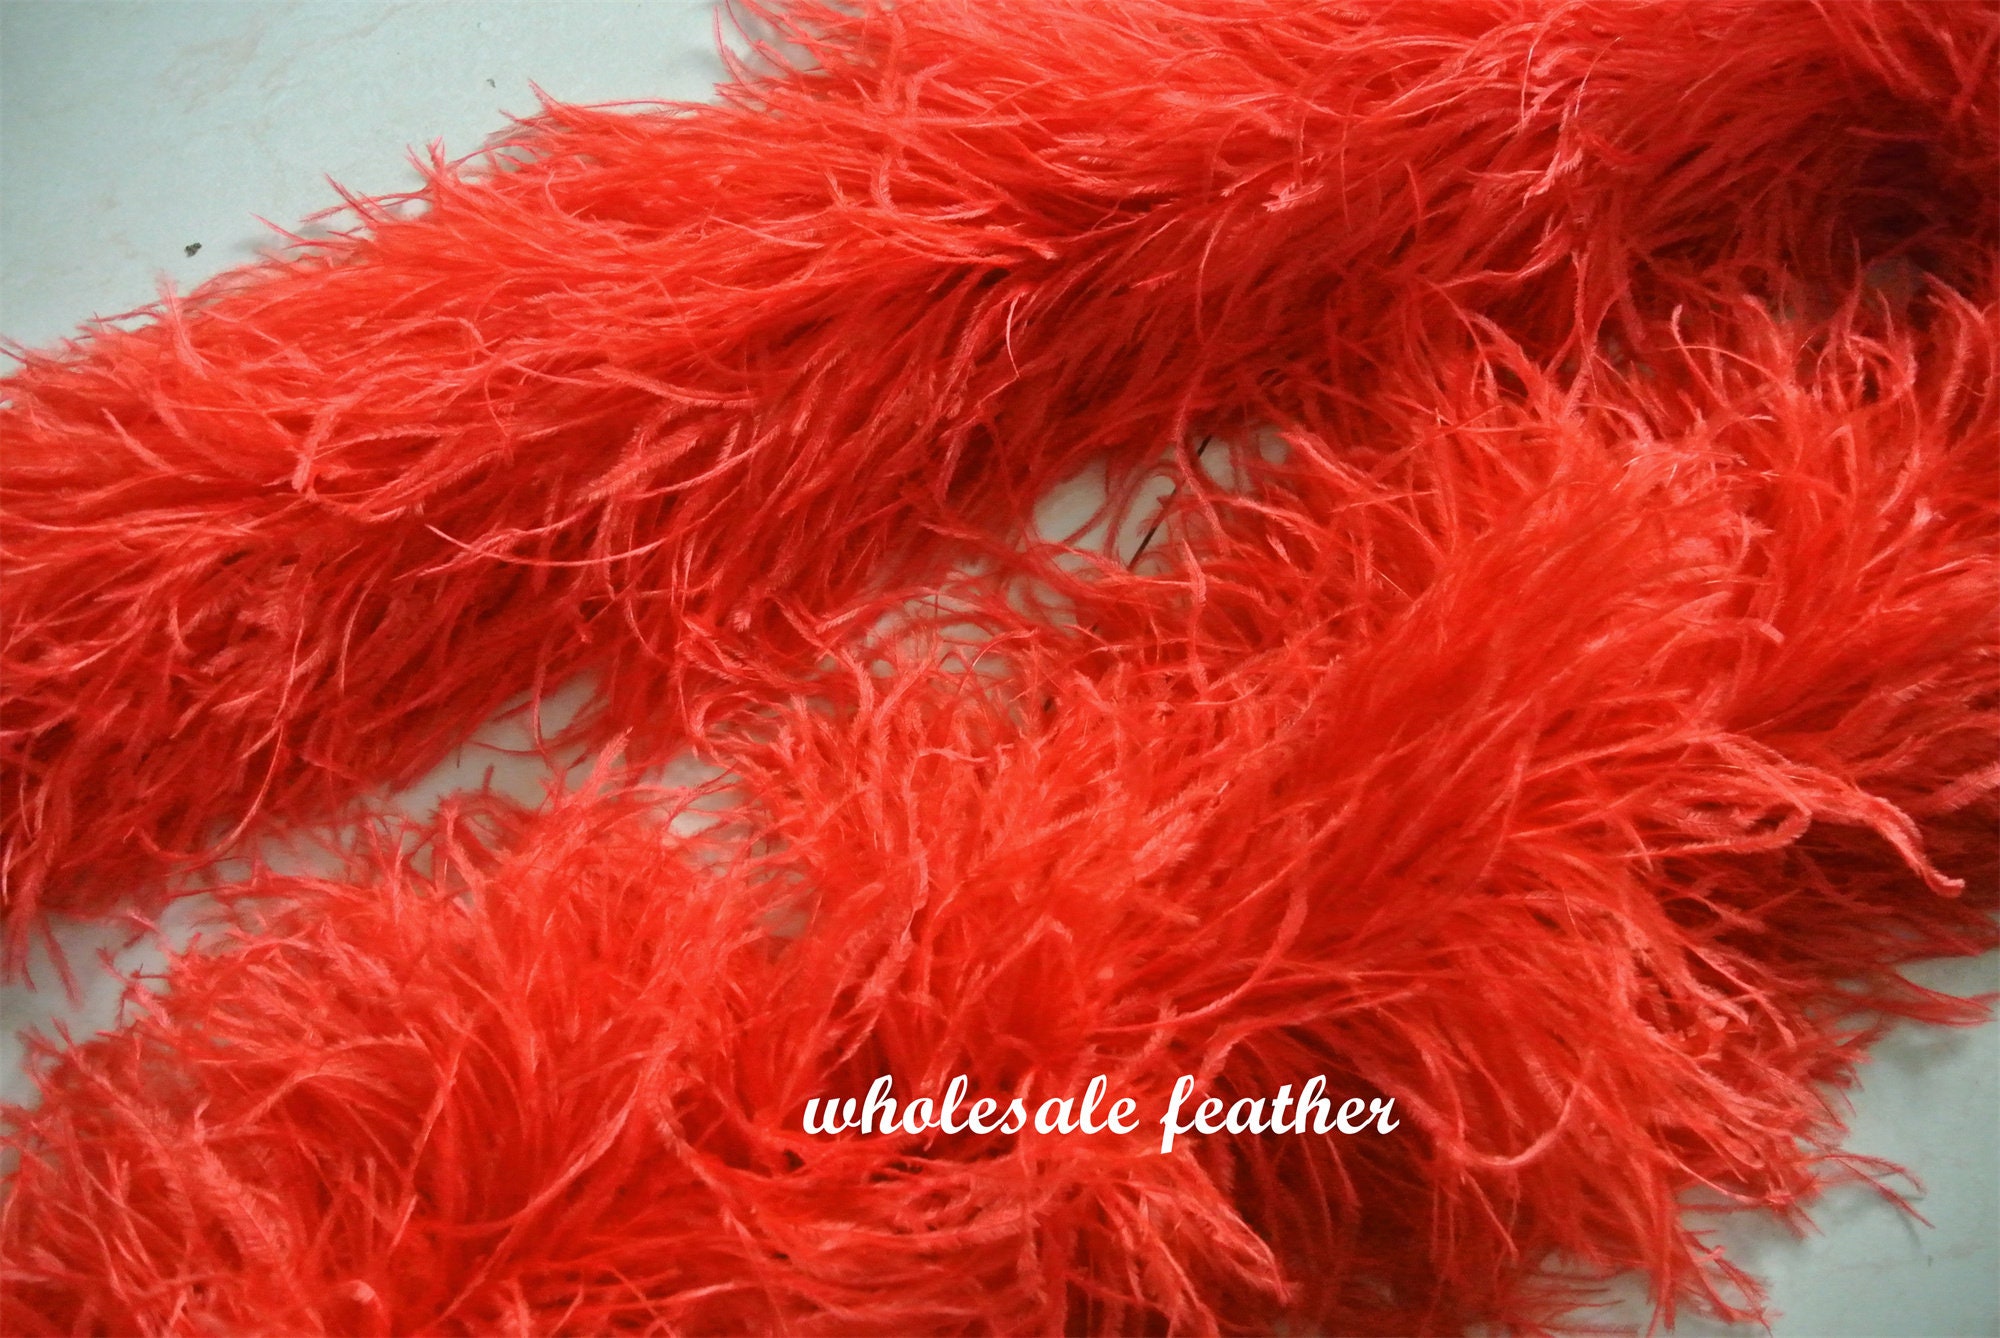 20 Ply Pink Luxury Ostrich Feather Boa 71long (180 cm)